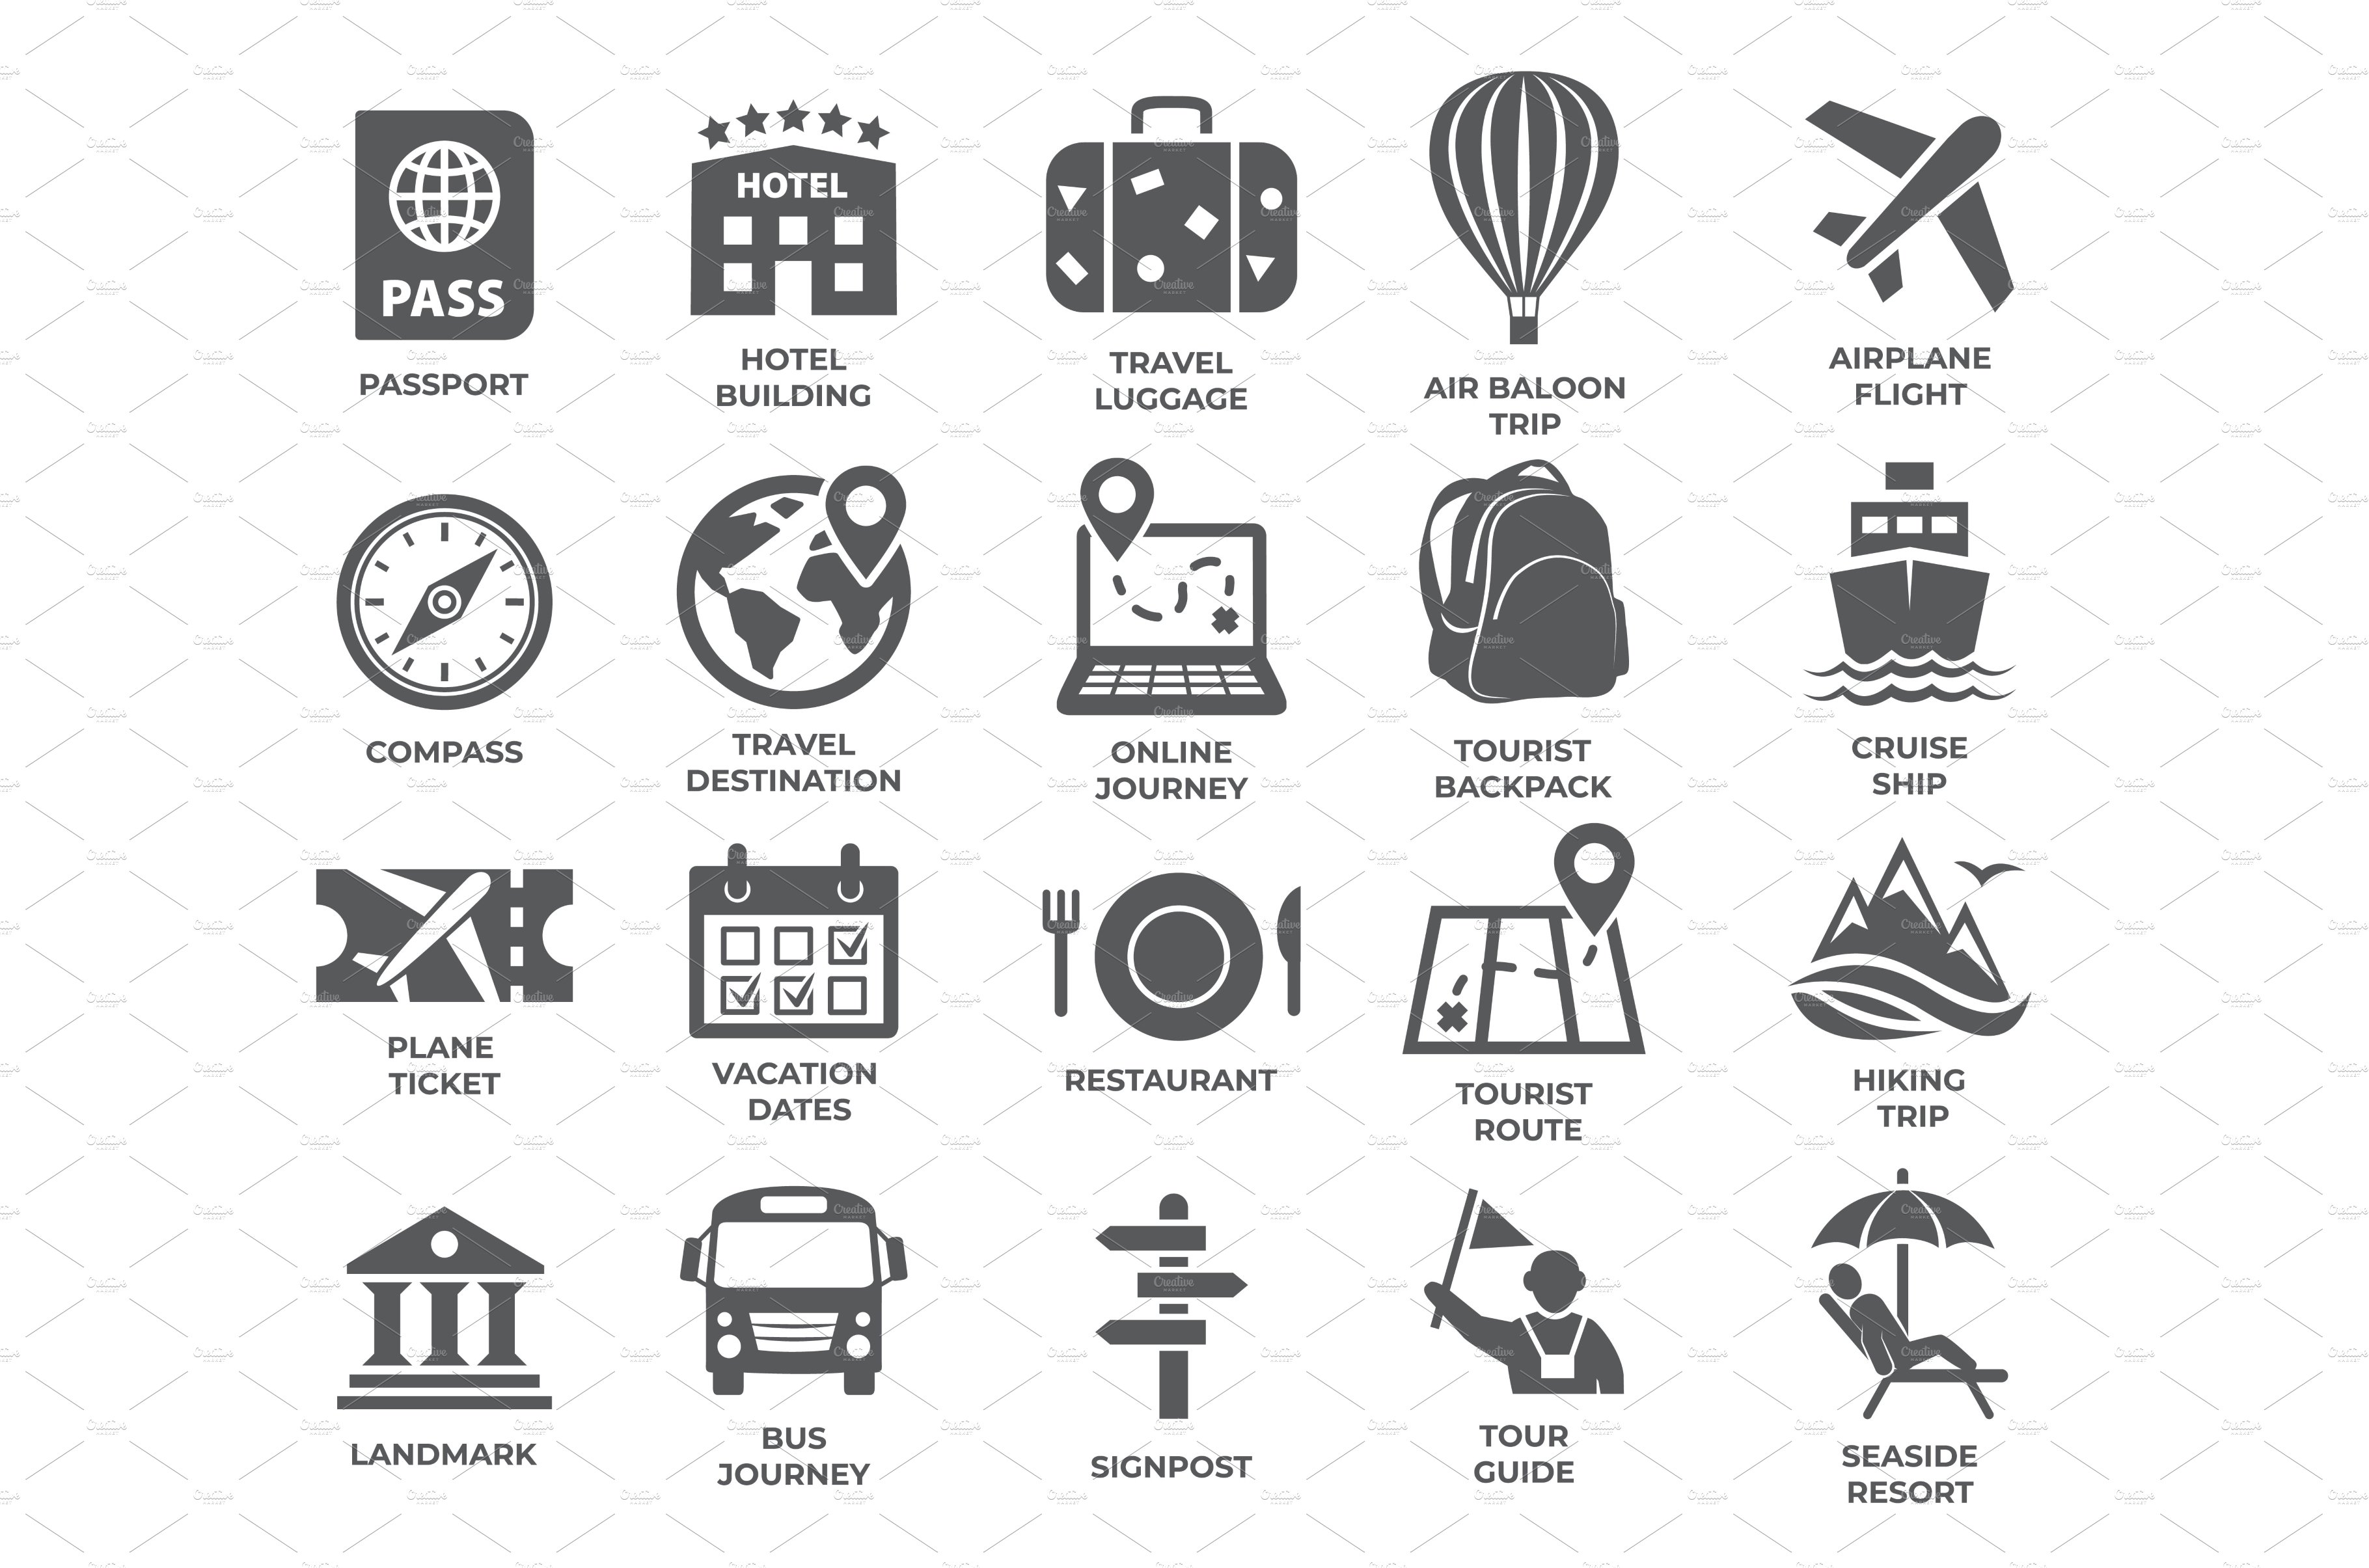 Tourism and travel icons set on cover image.